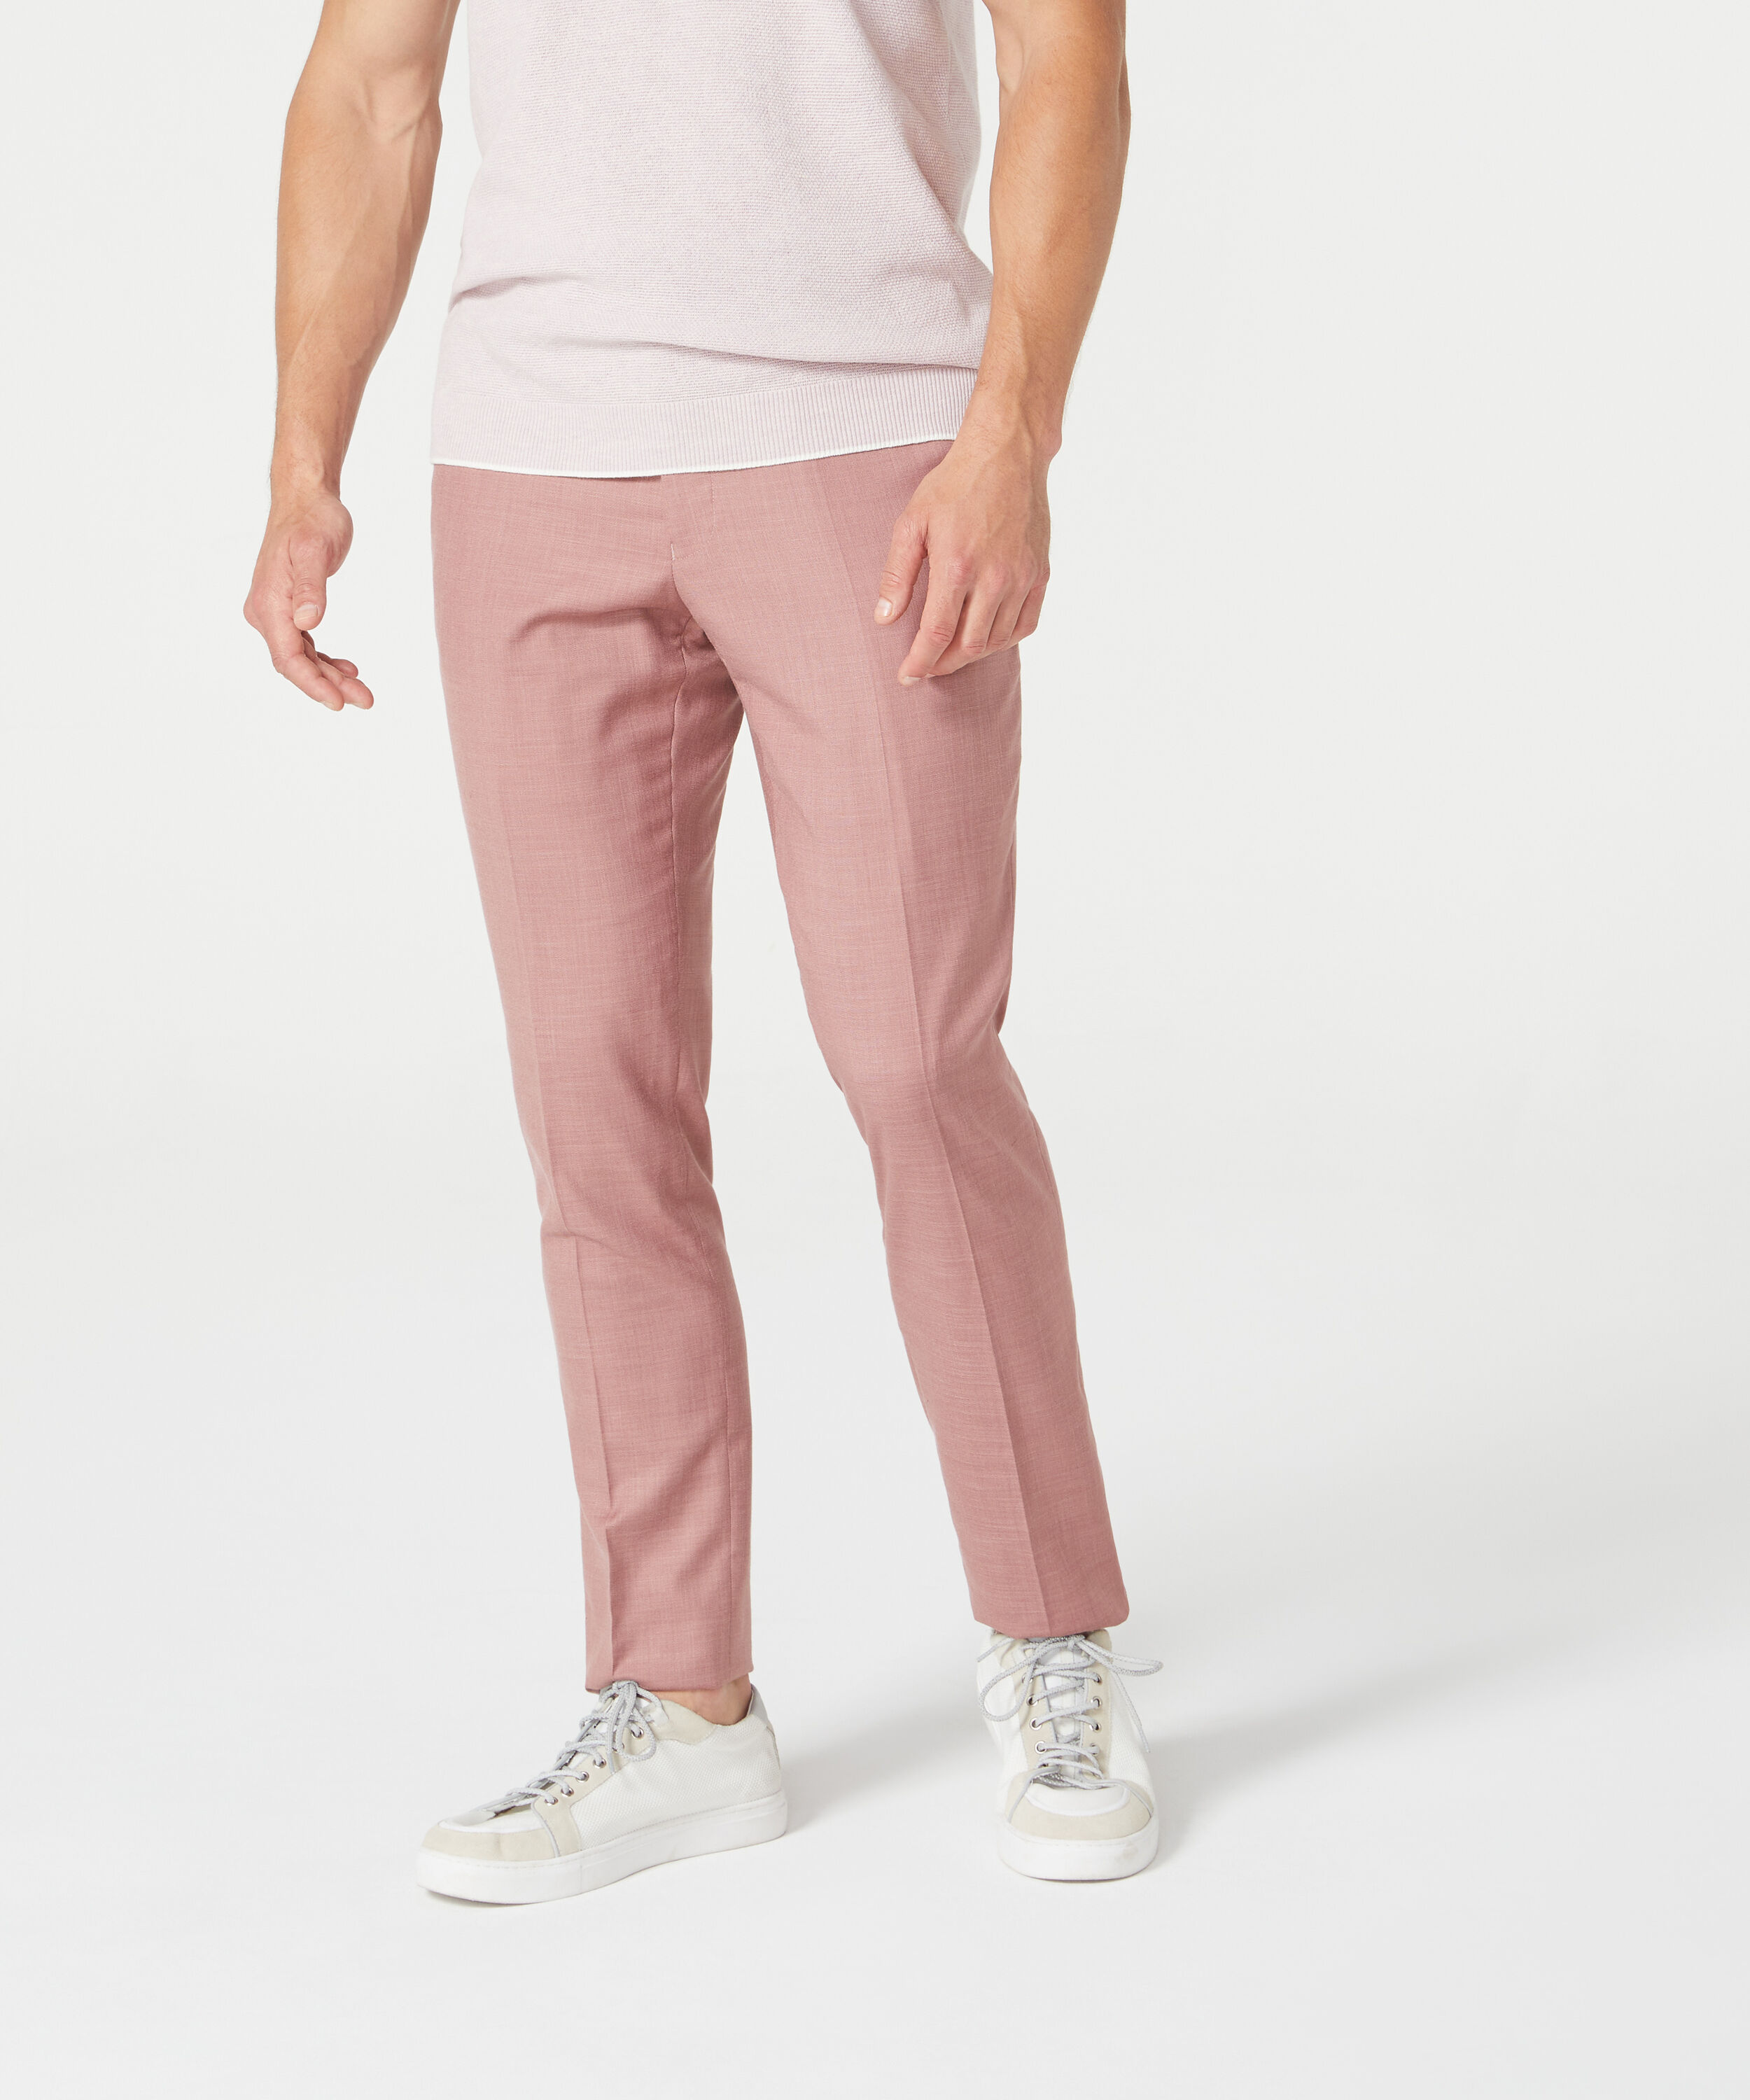 Adelaide Suit Pant